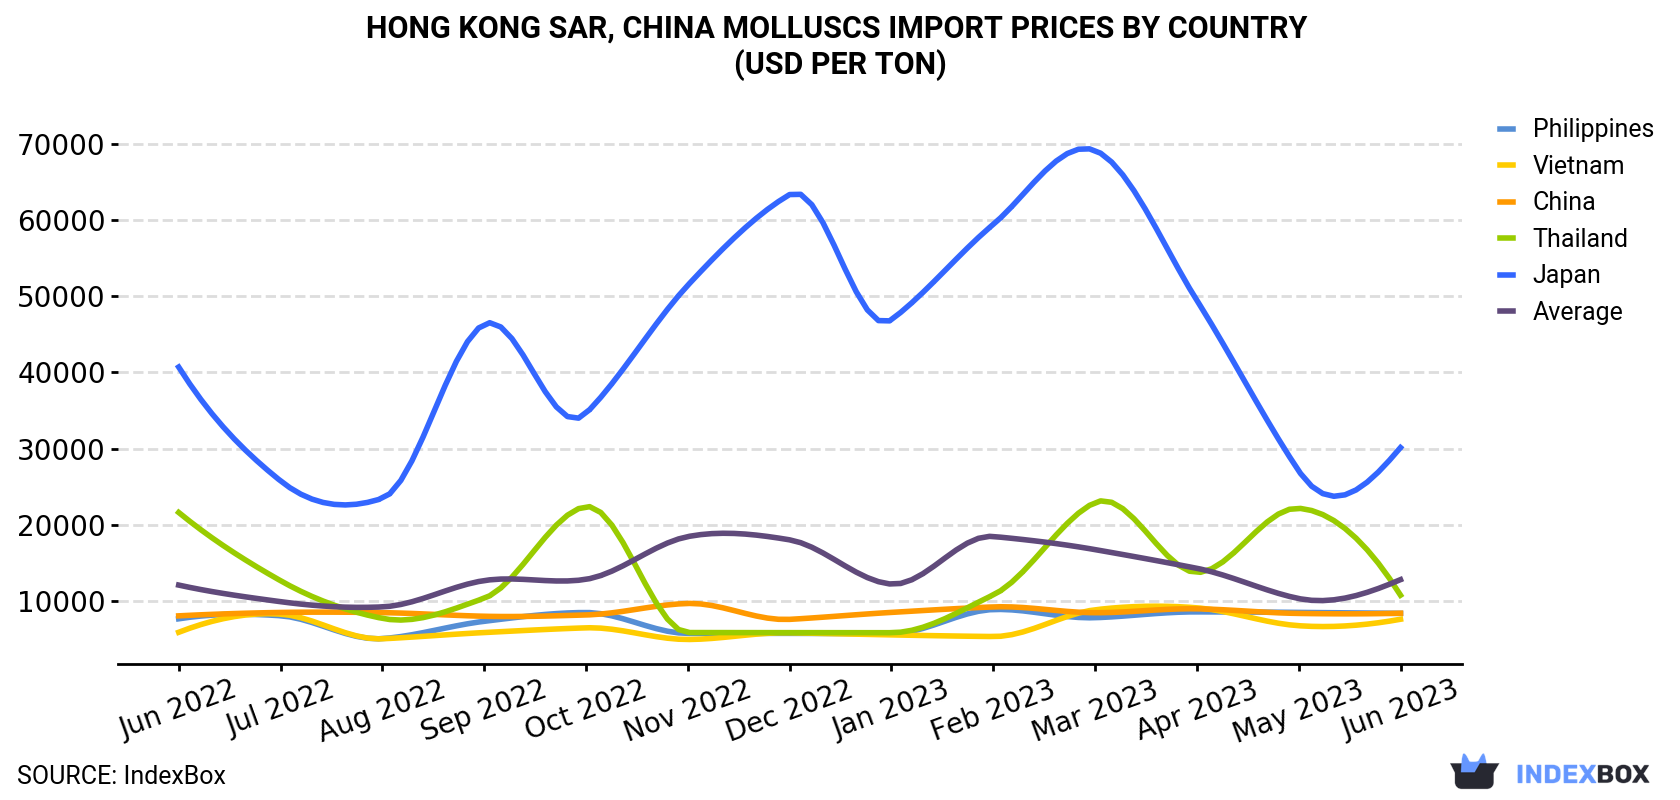 Hong Kong Molluscs Import Prices By Country (USD Per Ton)